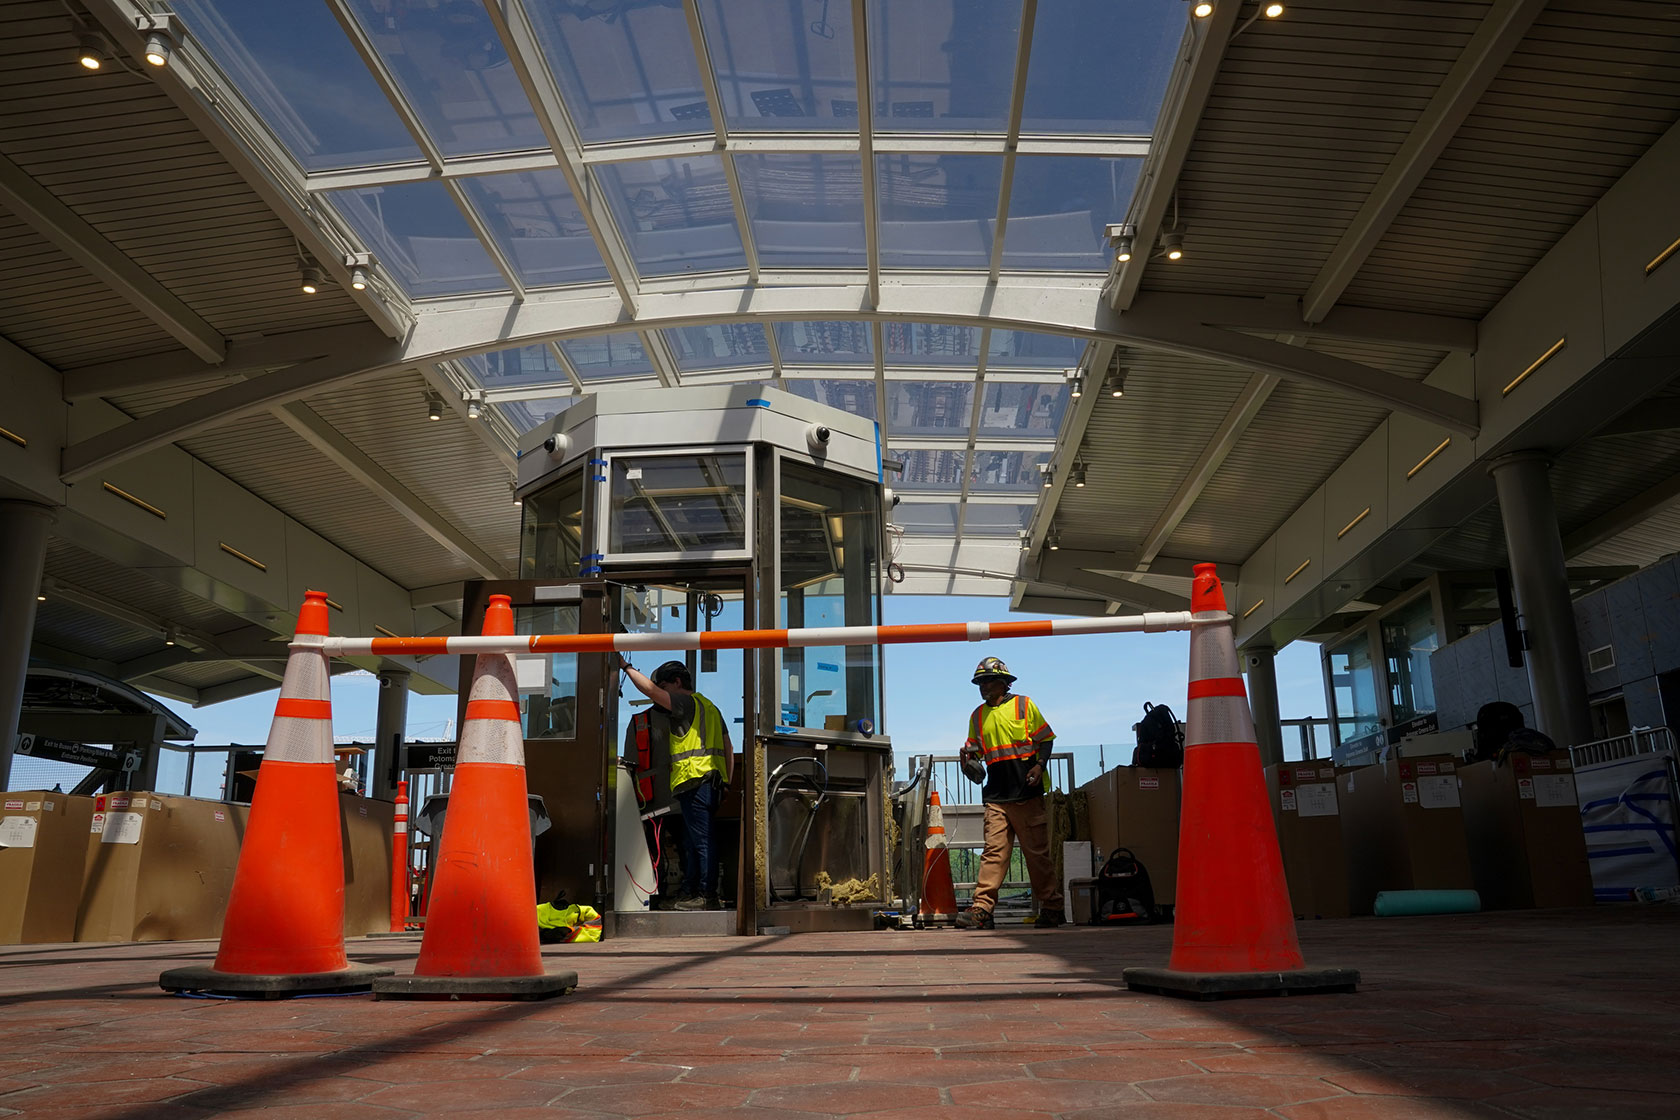 Photo shows two construction workers in bright clothing behind three orange cones at a metro station with glass ceilings